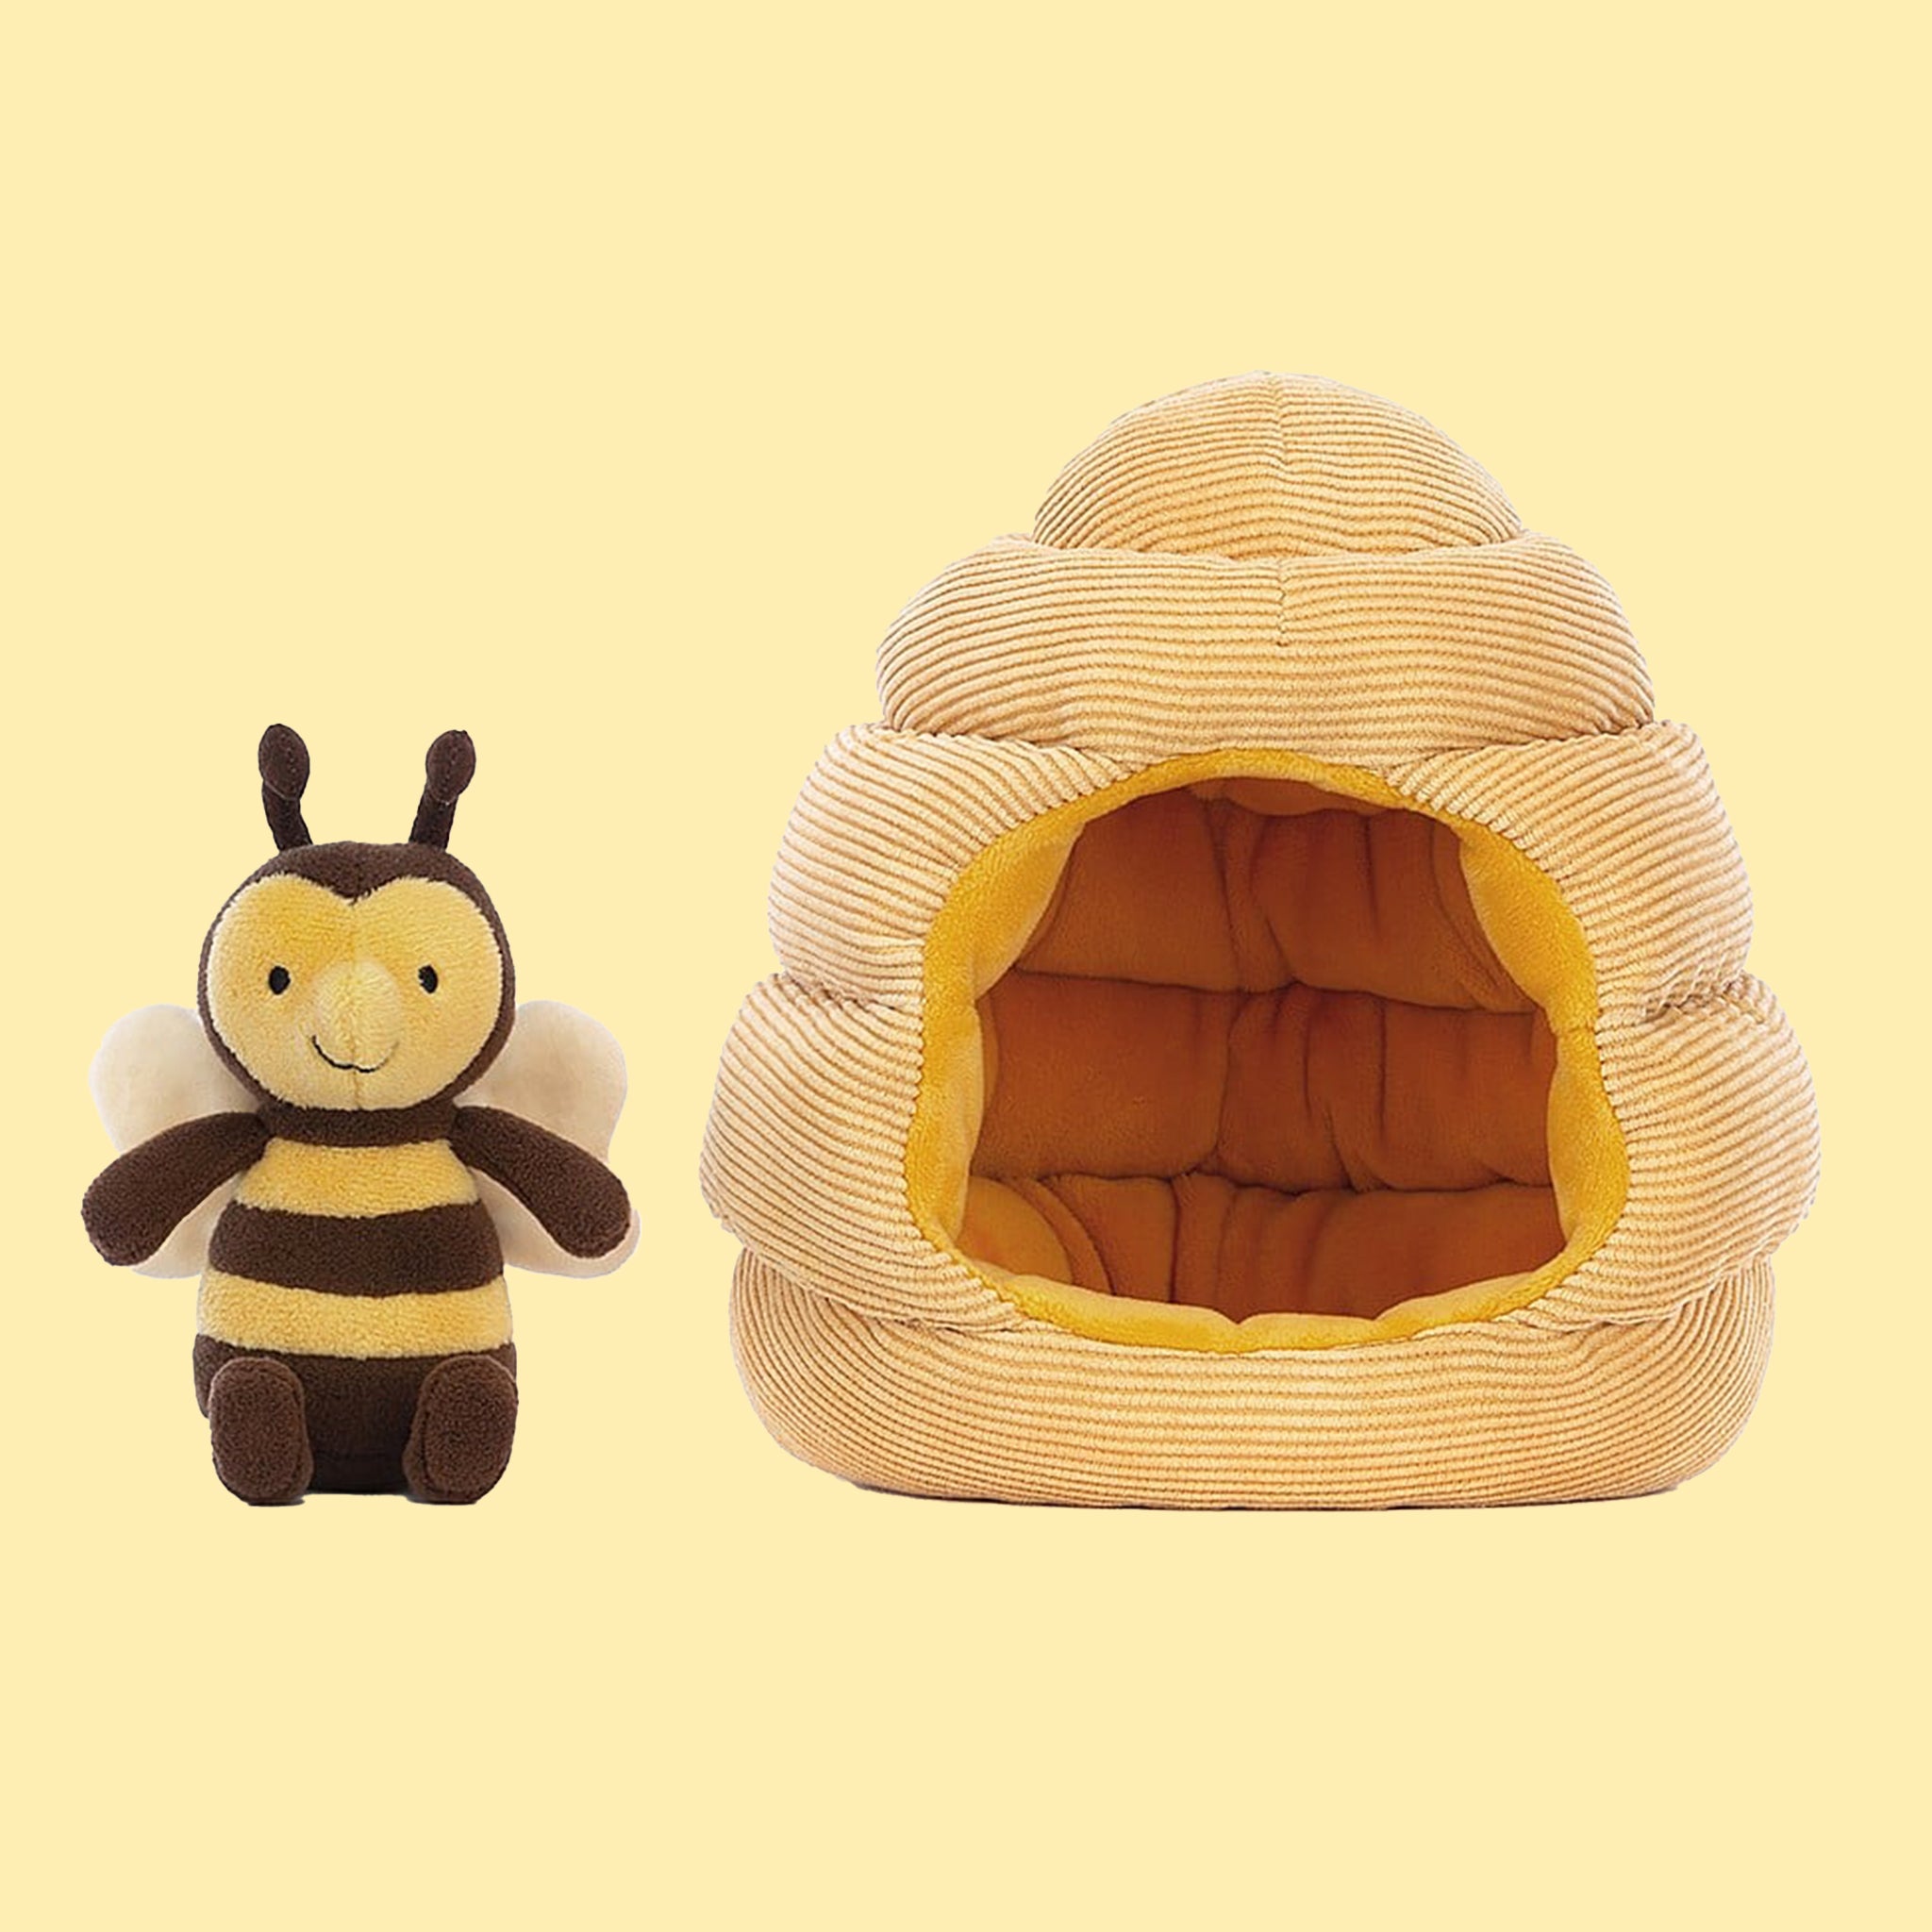 A bee shaped stuffed toy along with a honeybee hive shaped toy.